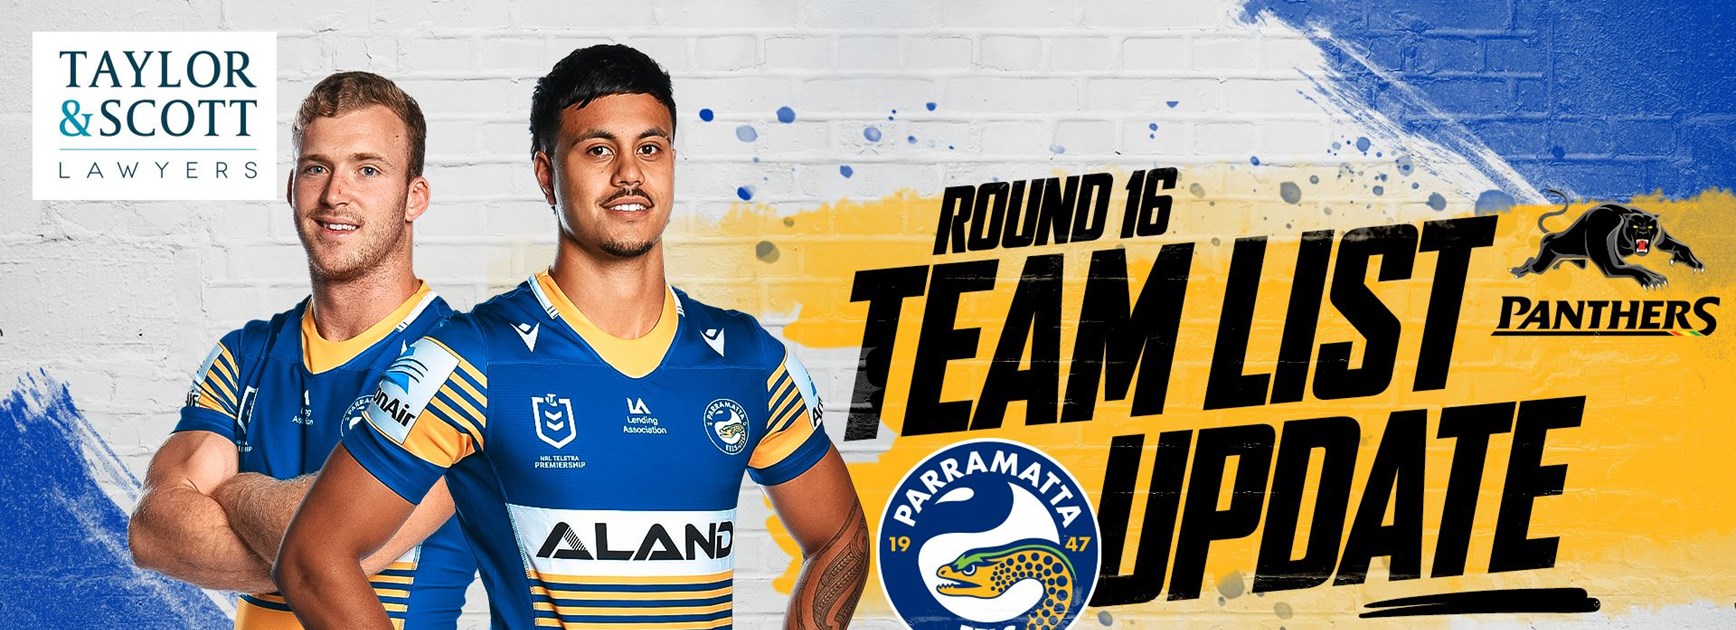 Team List Update - Panthers v Eels, Round 16